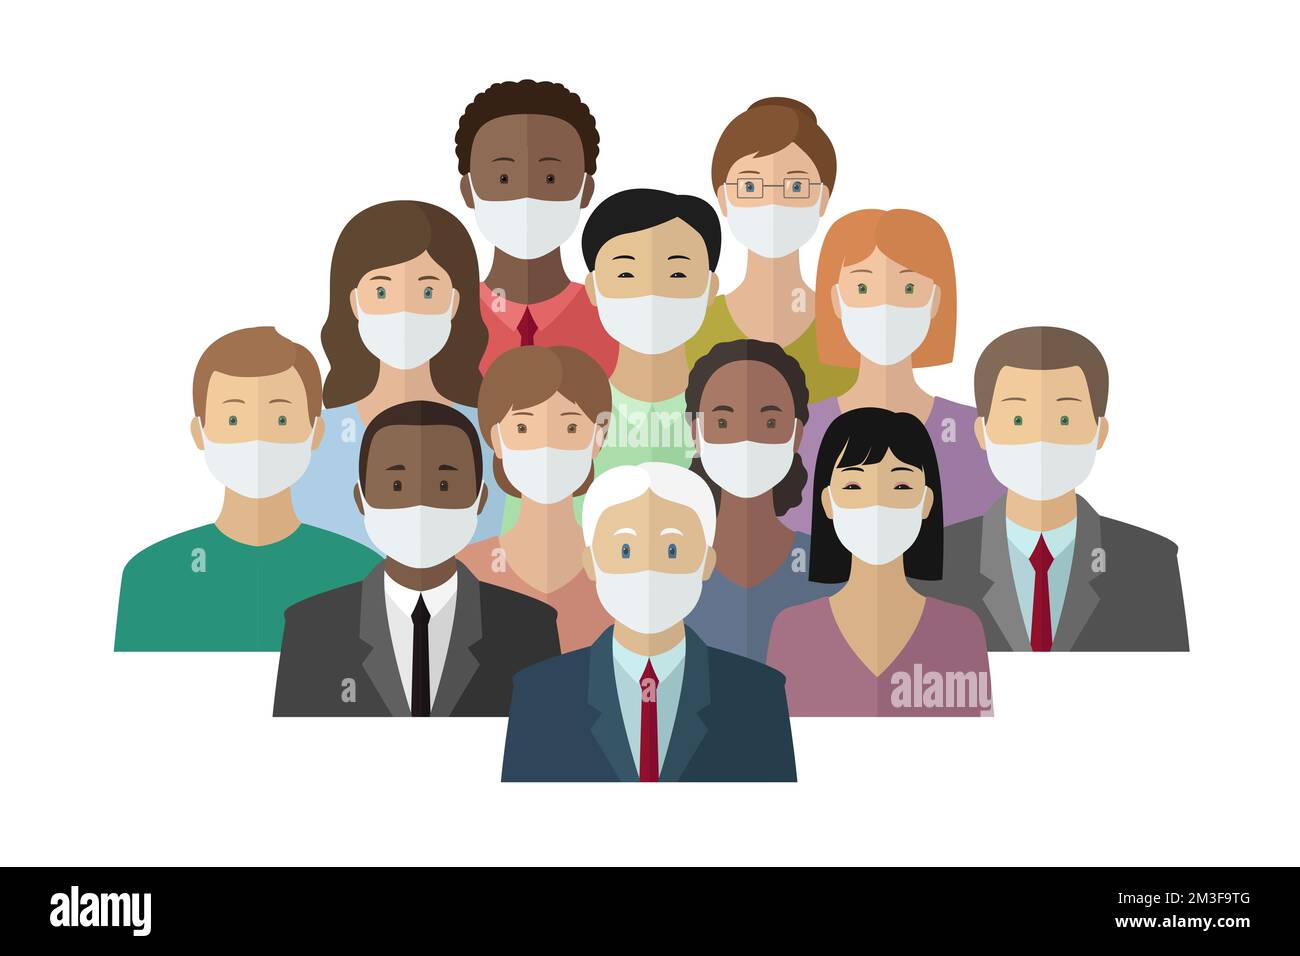 Group of people in medical masks. Vector illustration. Stock Vector